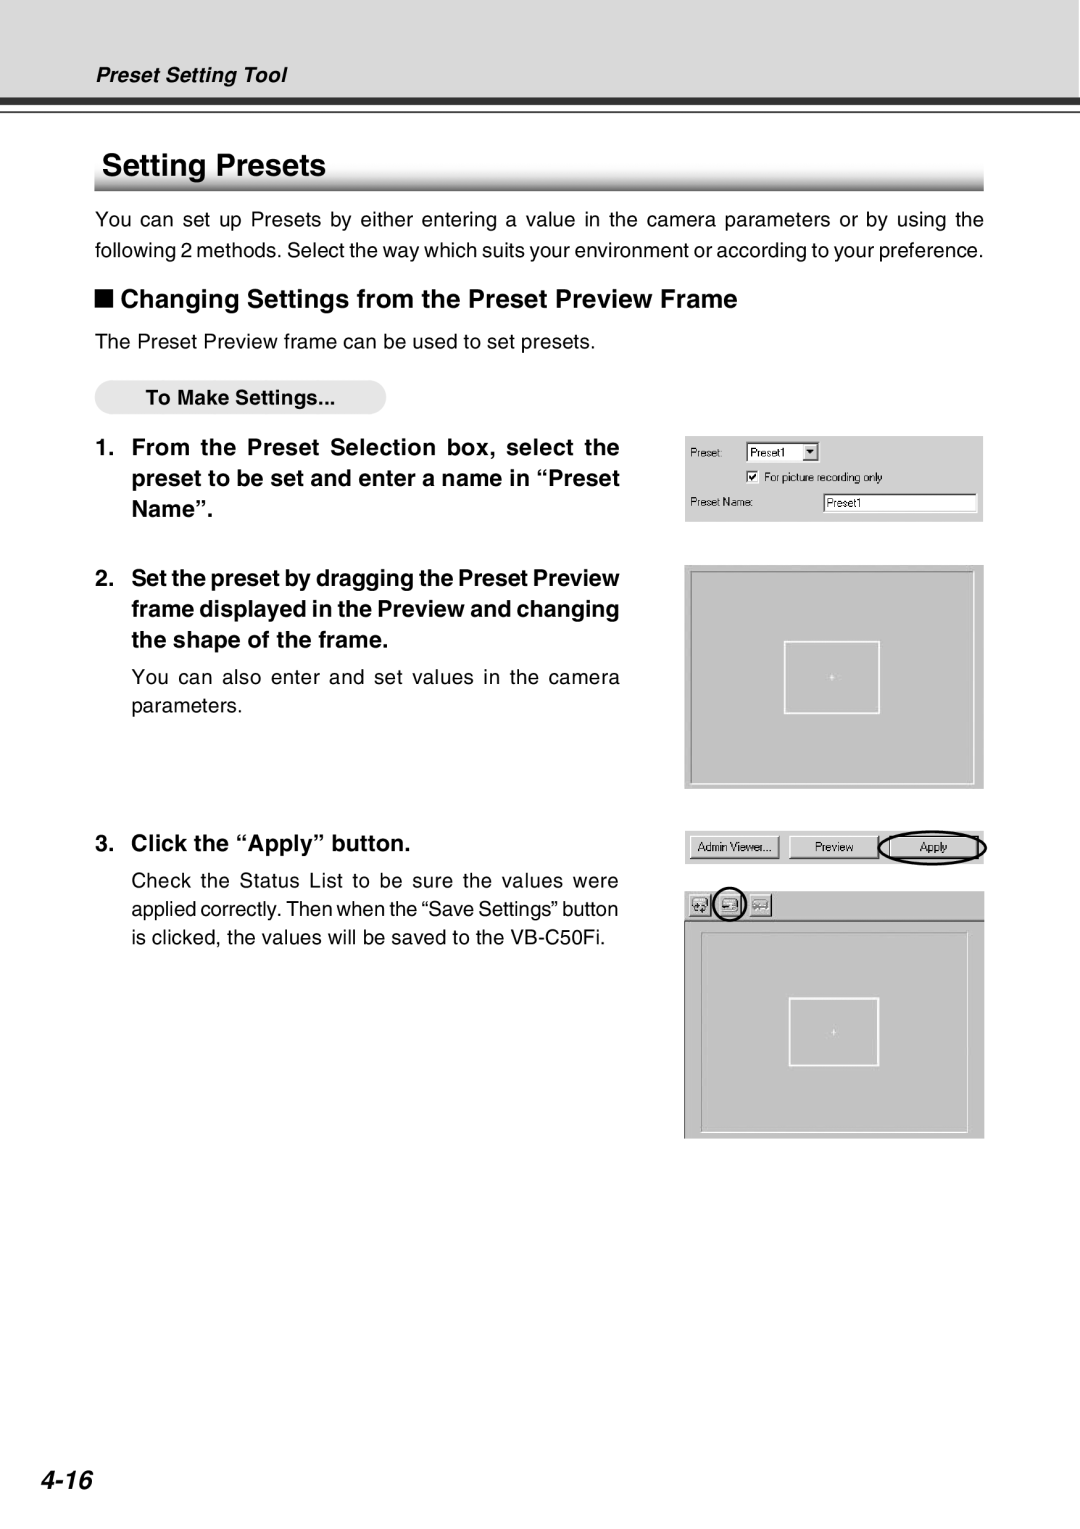 Canon Vb-C50fi user manual Setting Presets, Changing Settings from the Preset Preview Frame, 4-16 